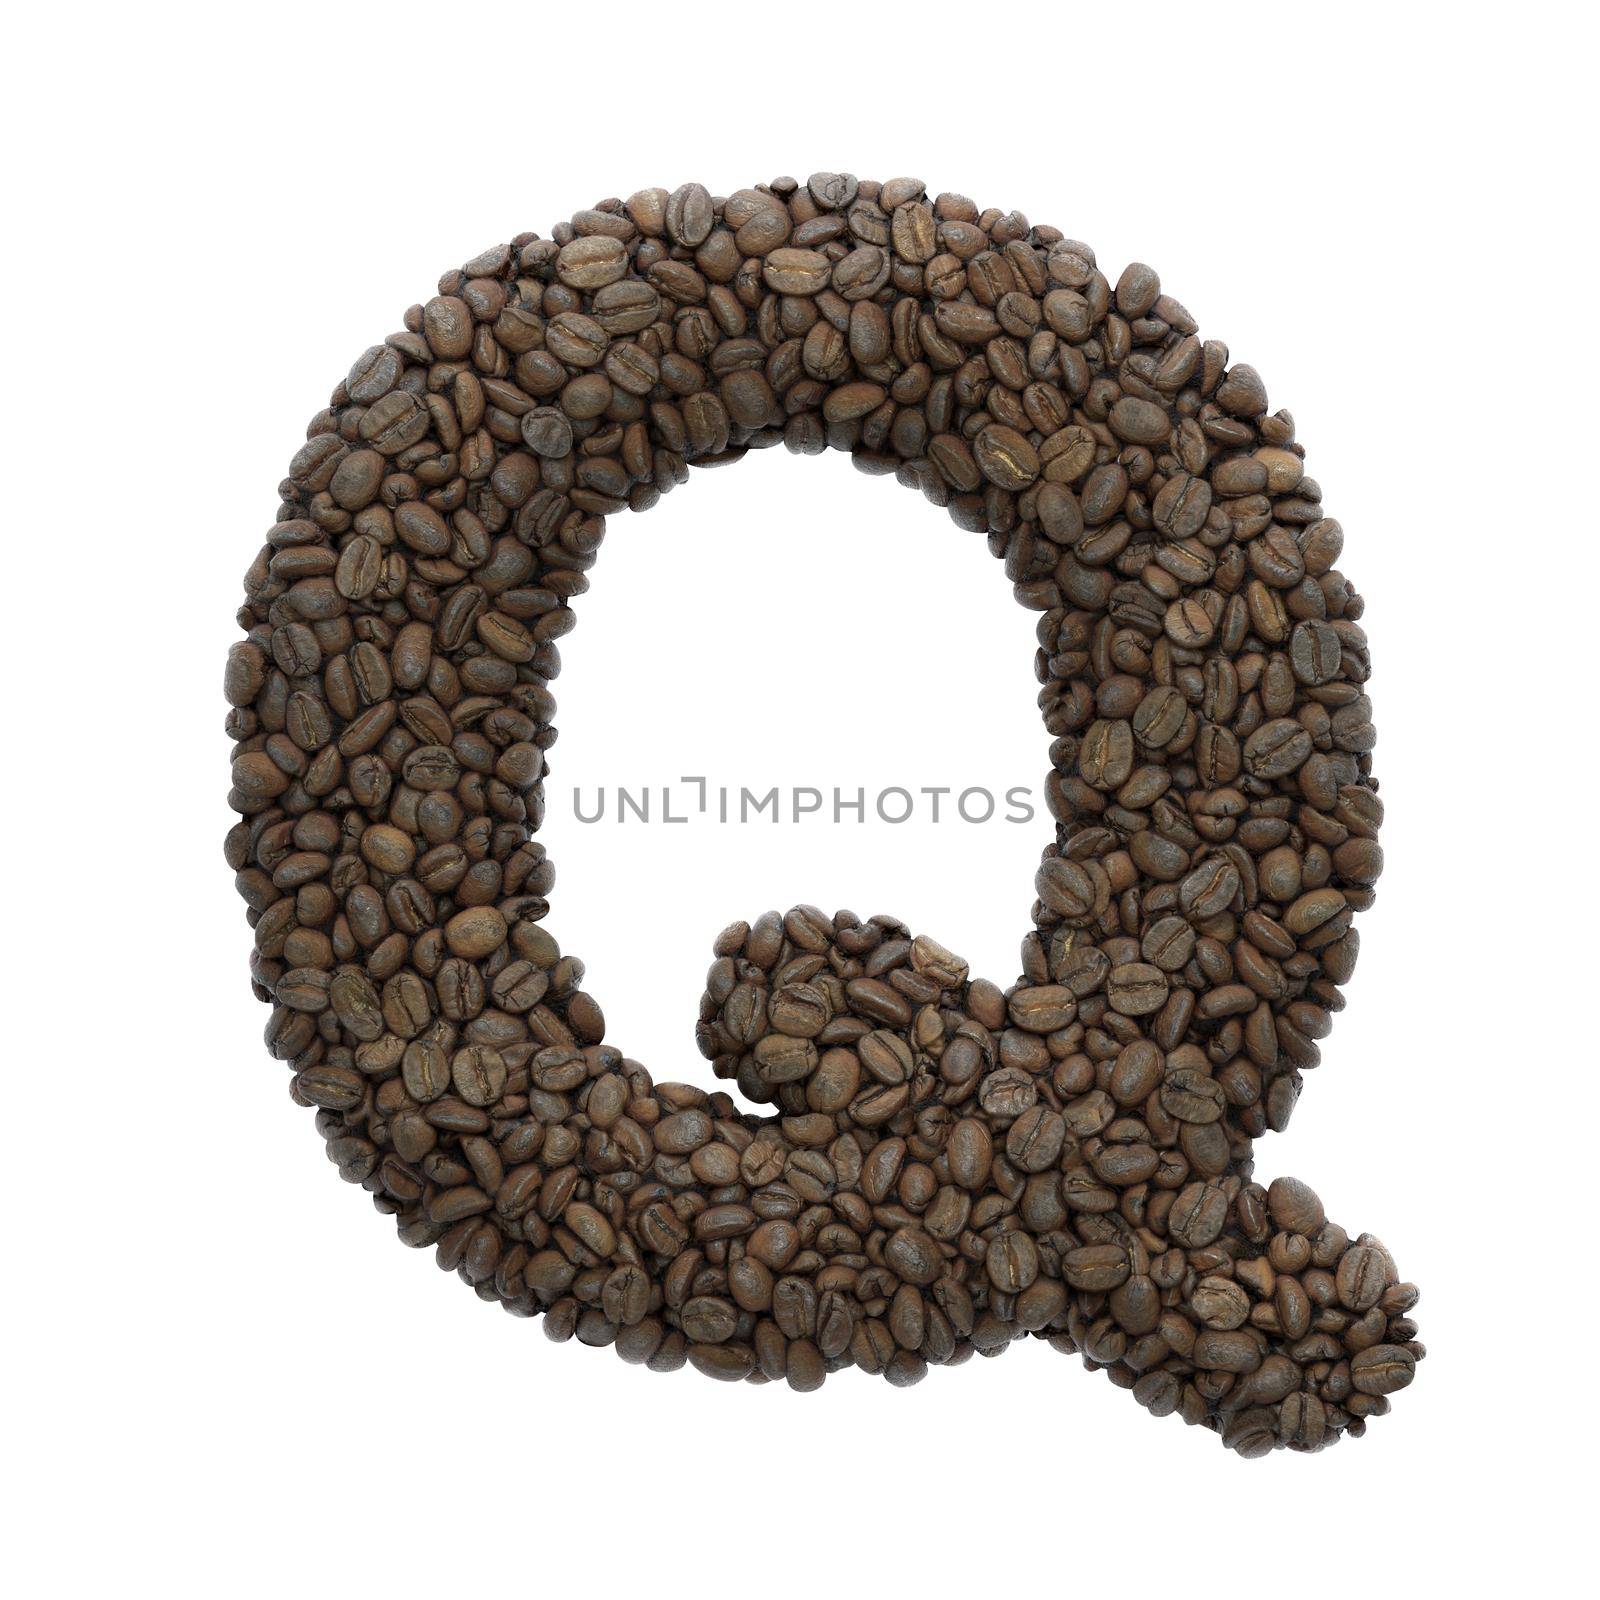 Coffee letter Q - Upper-case 3d roasted beans font - suitable for Coffee, energy or insomnia related subjects by chrisroll